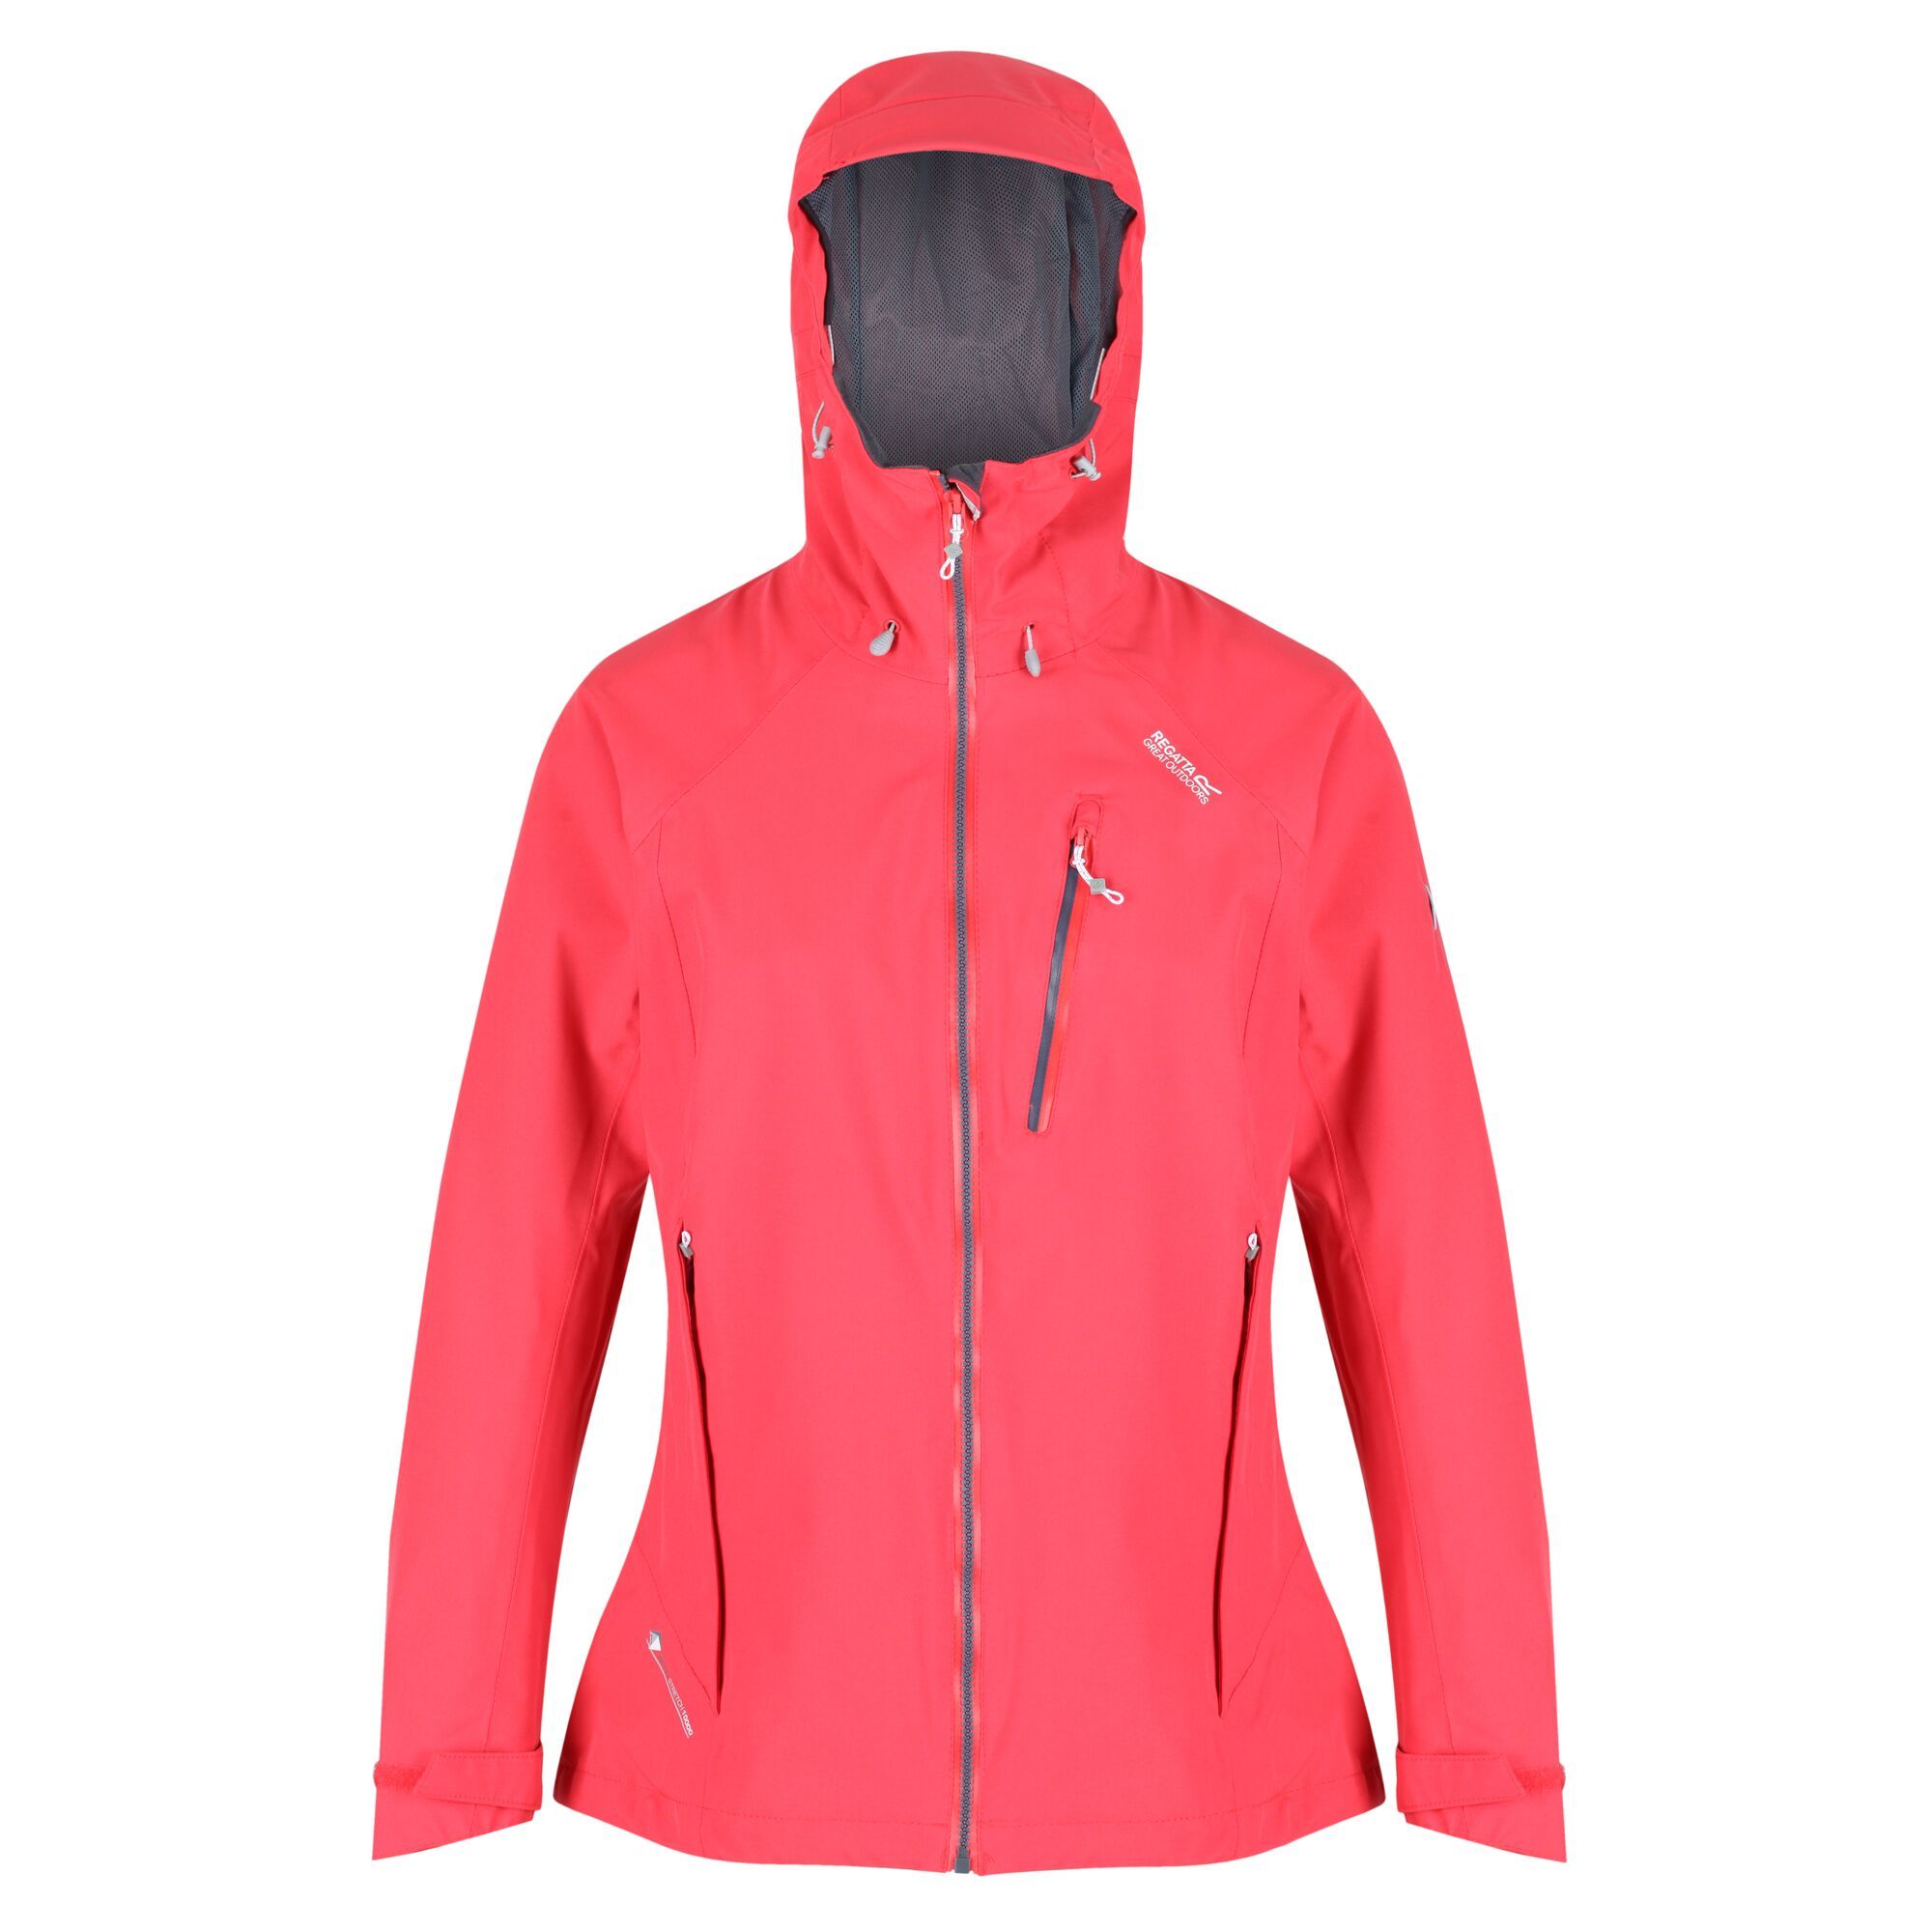 100% Polyester. Clean cut full stretch ISOTEX 10,000 shell jacket. Waterproof and breathable protection. Taped seams. Durable water repellent. Peaked hood with adjusters. Shockcord hem.